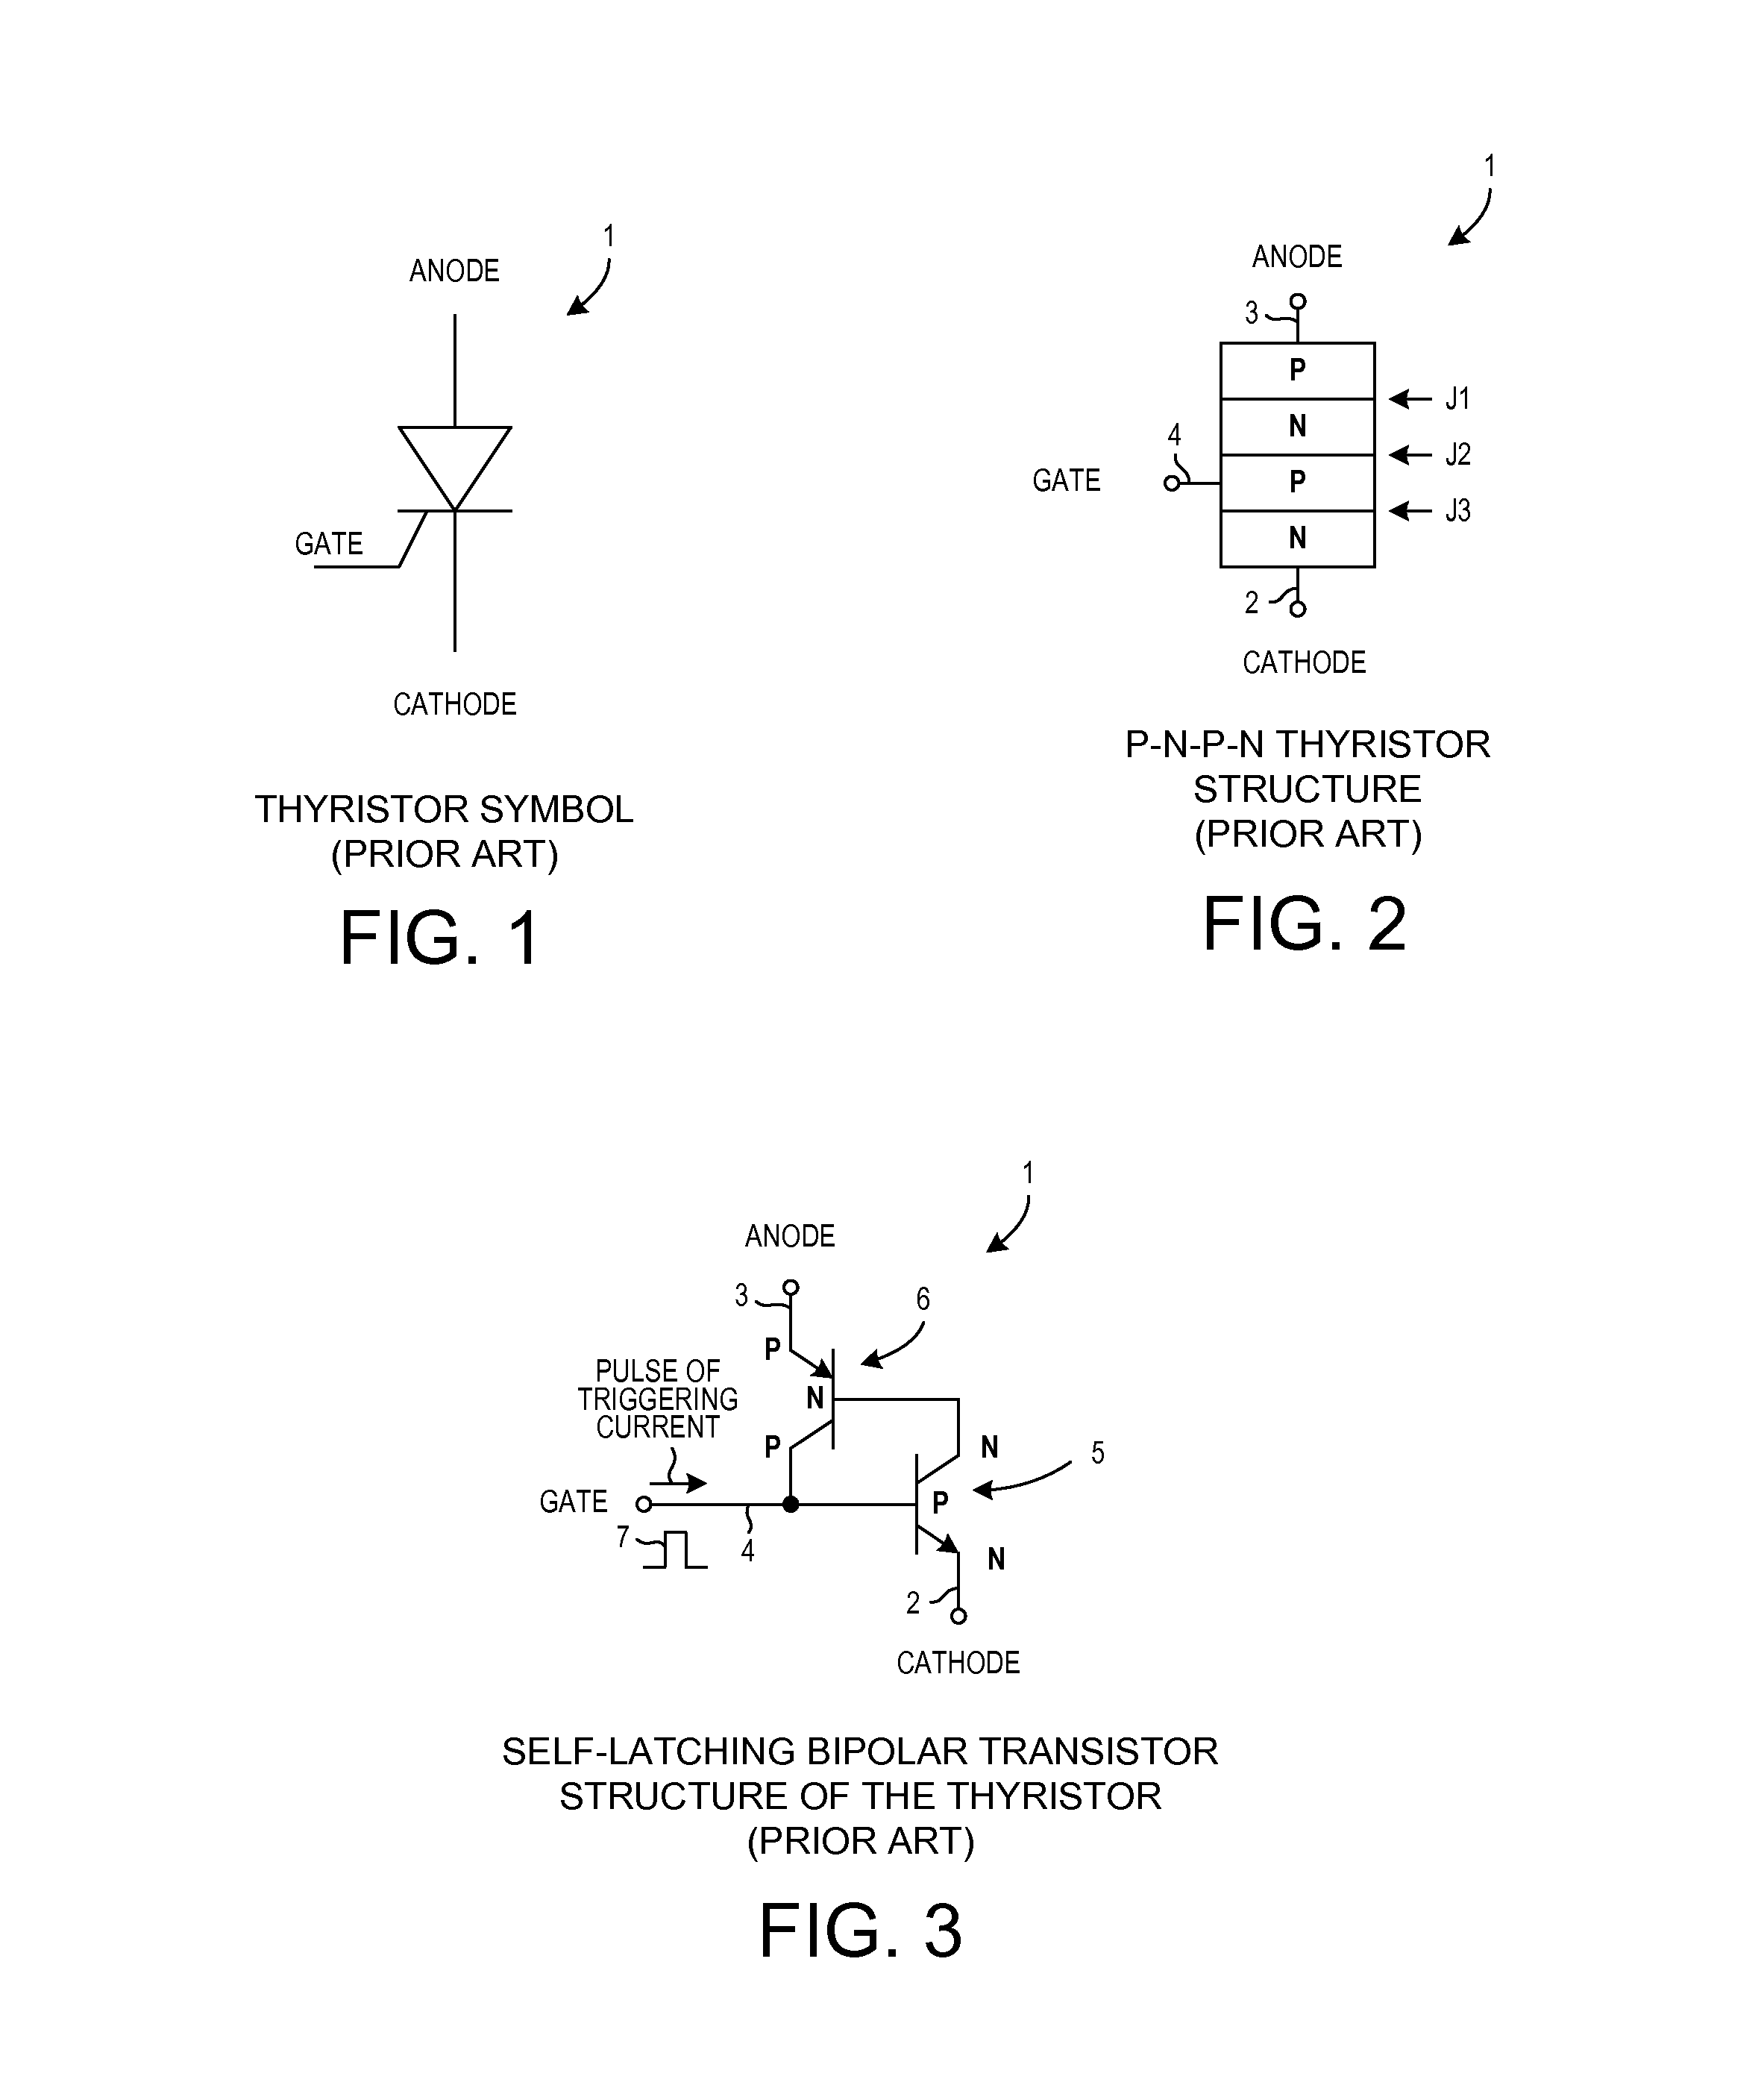 Packaged overvoltage protection circuit for triggering thyristors